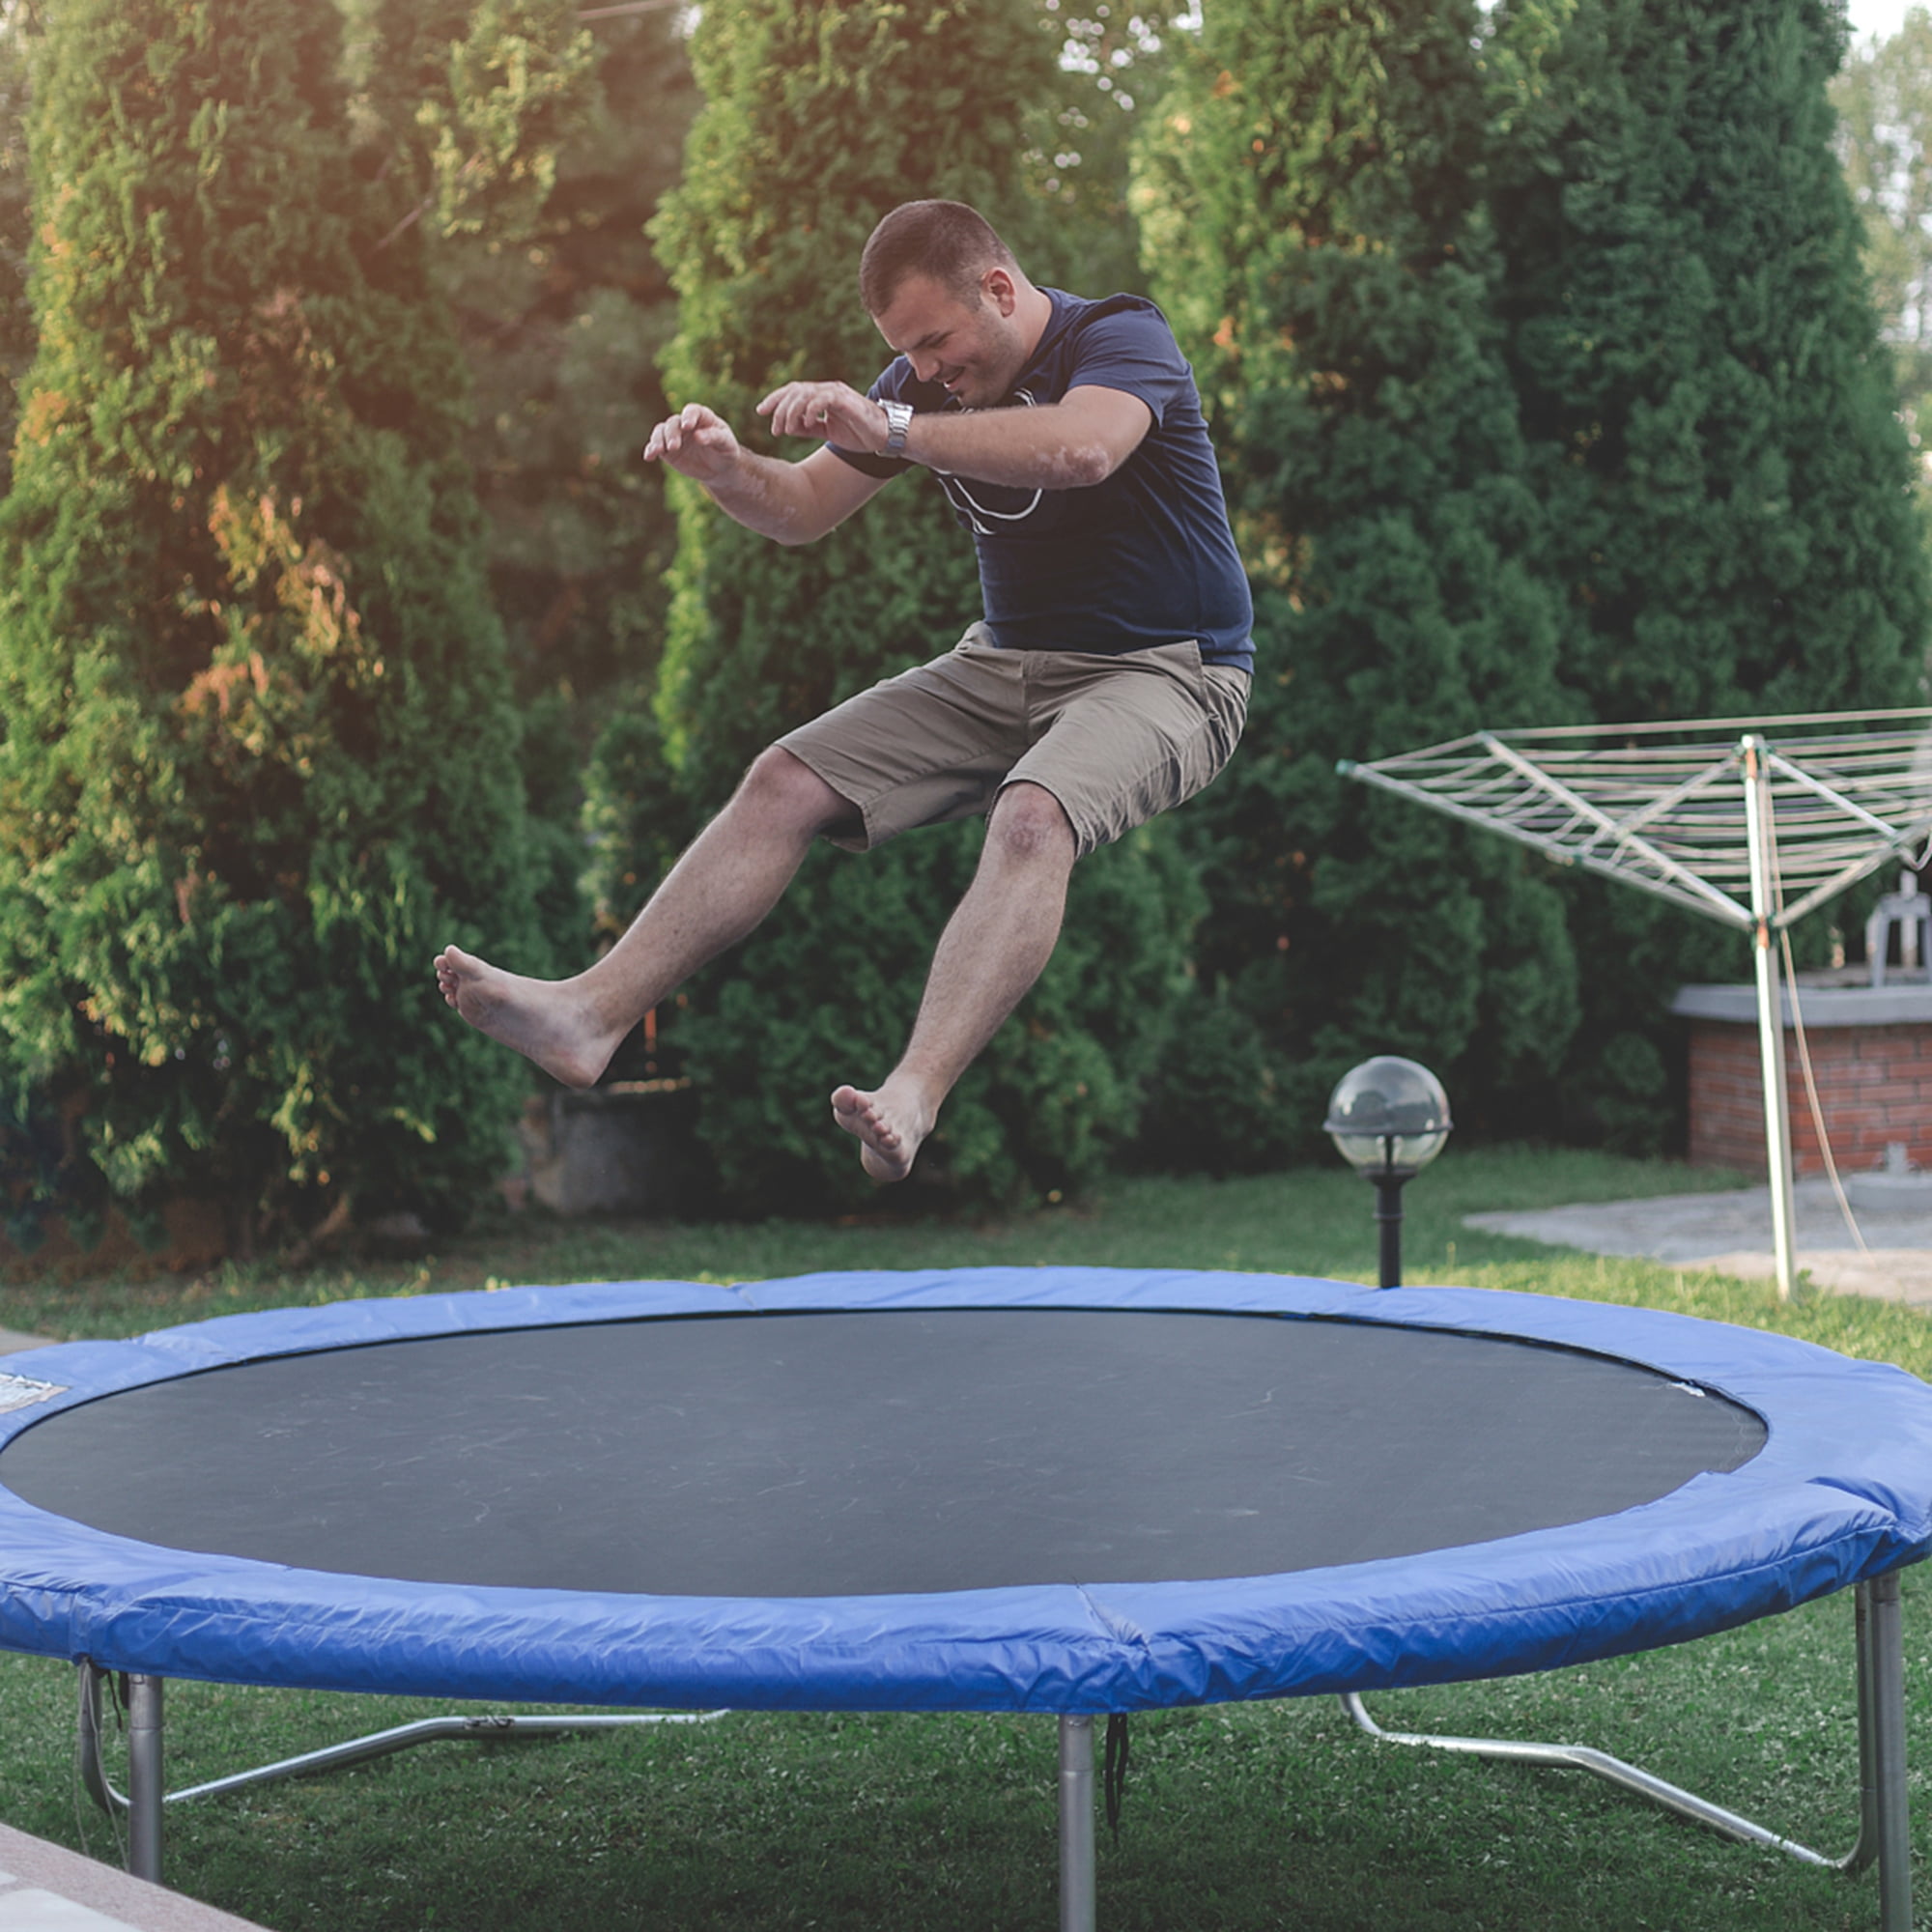 Durable V-Rings Premium Trampoline Replacement Mat UV Sunguard for Longer Lasting Stitching Bounce Safely,6 feet 36 Buckles Fits 14 Foot Frames w/Spring Tool 